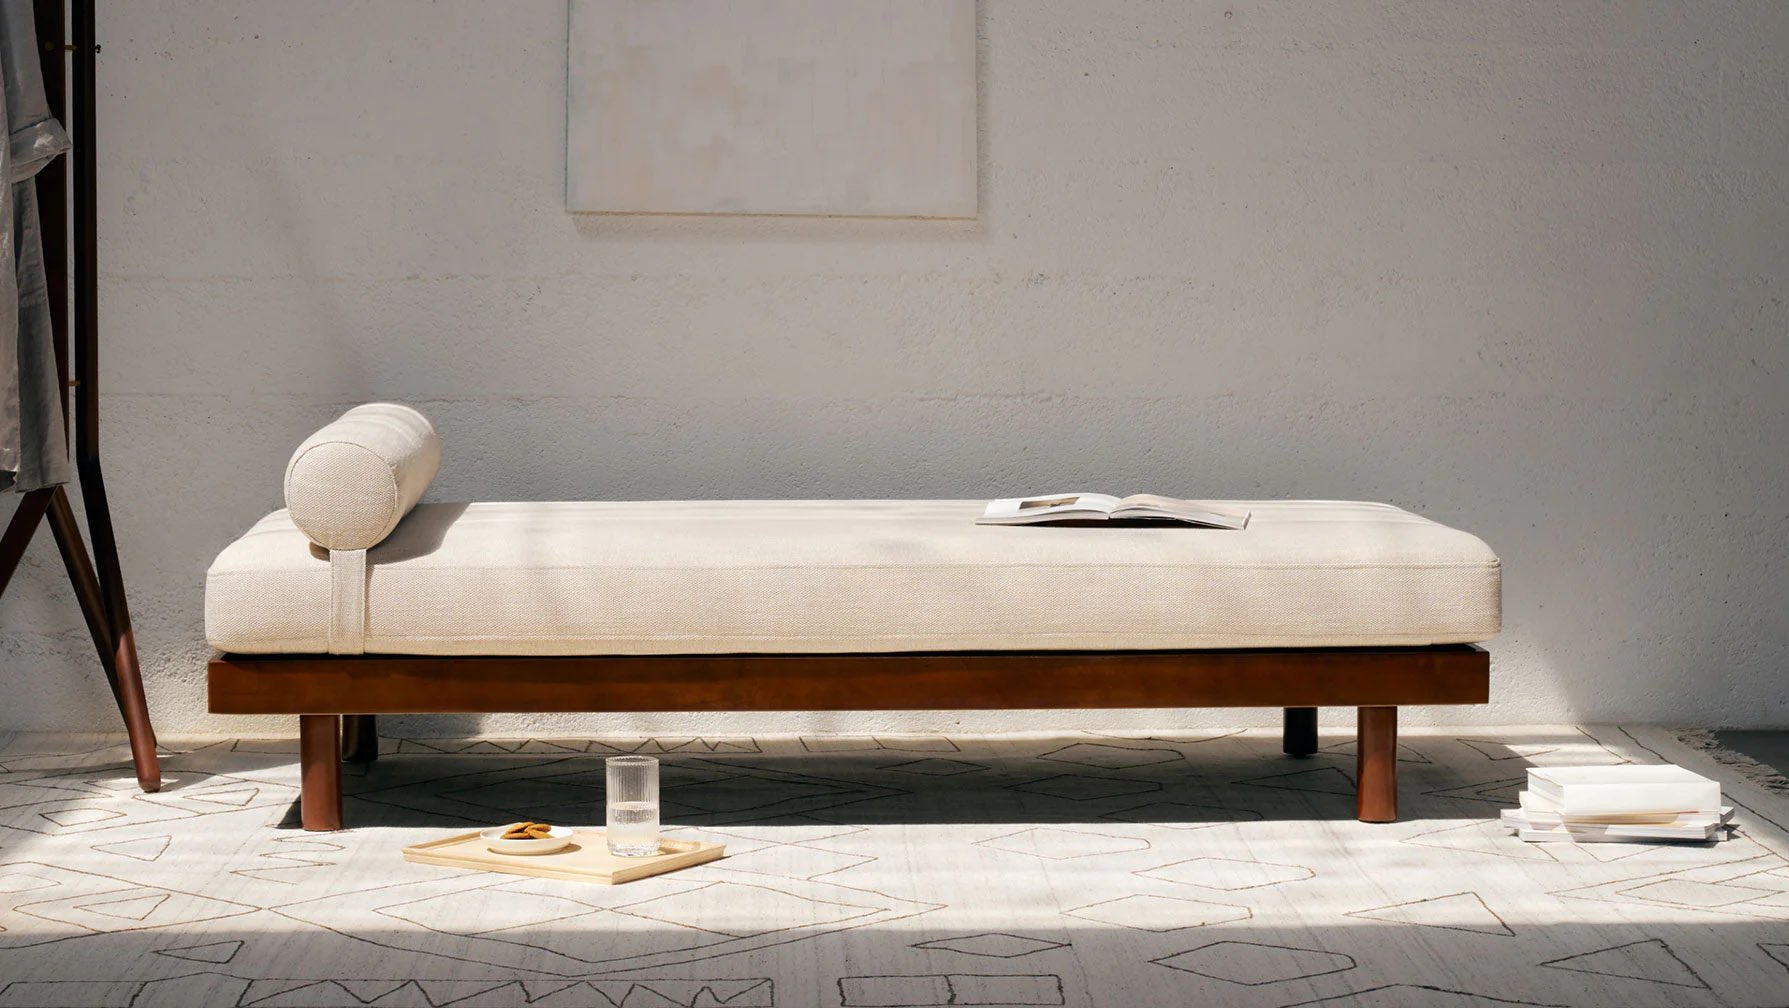 A minimalist daybed with beige upholstery and a cylindrical pillow is placed in a bright room with a white wall. A small wooden tray with a glass of water and biscuits rests on the floor nearby, along with an open book on the daybed. Geometric rug lies beneath.